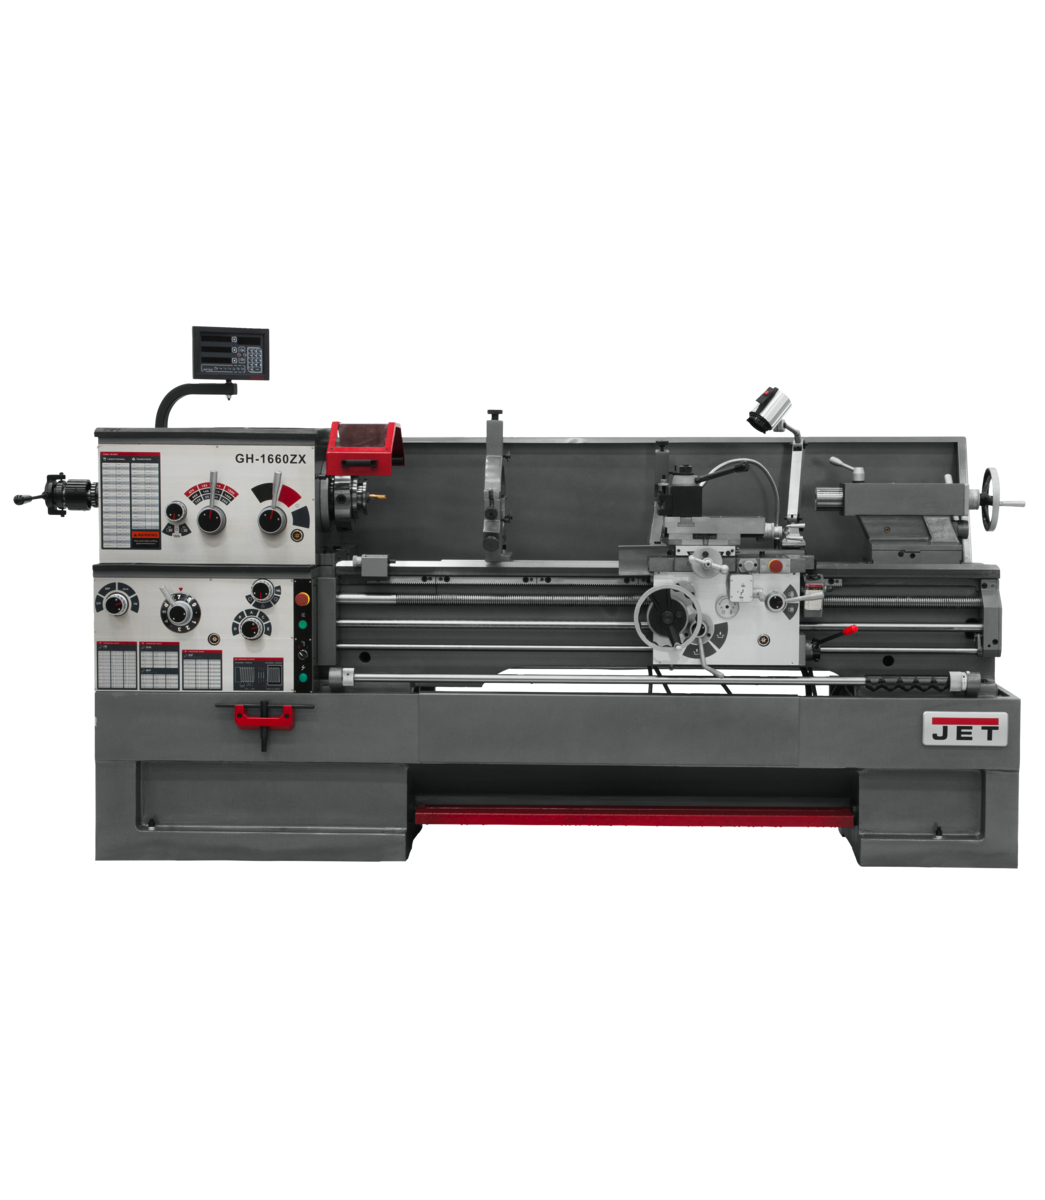 321440, GH-1660ZX Lathe with 2-axis ACU-RITE 203 & Collet Closer Installed, Jet, Metalworking, Turning, Lathes